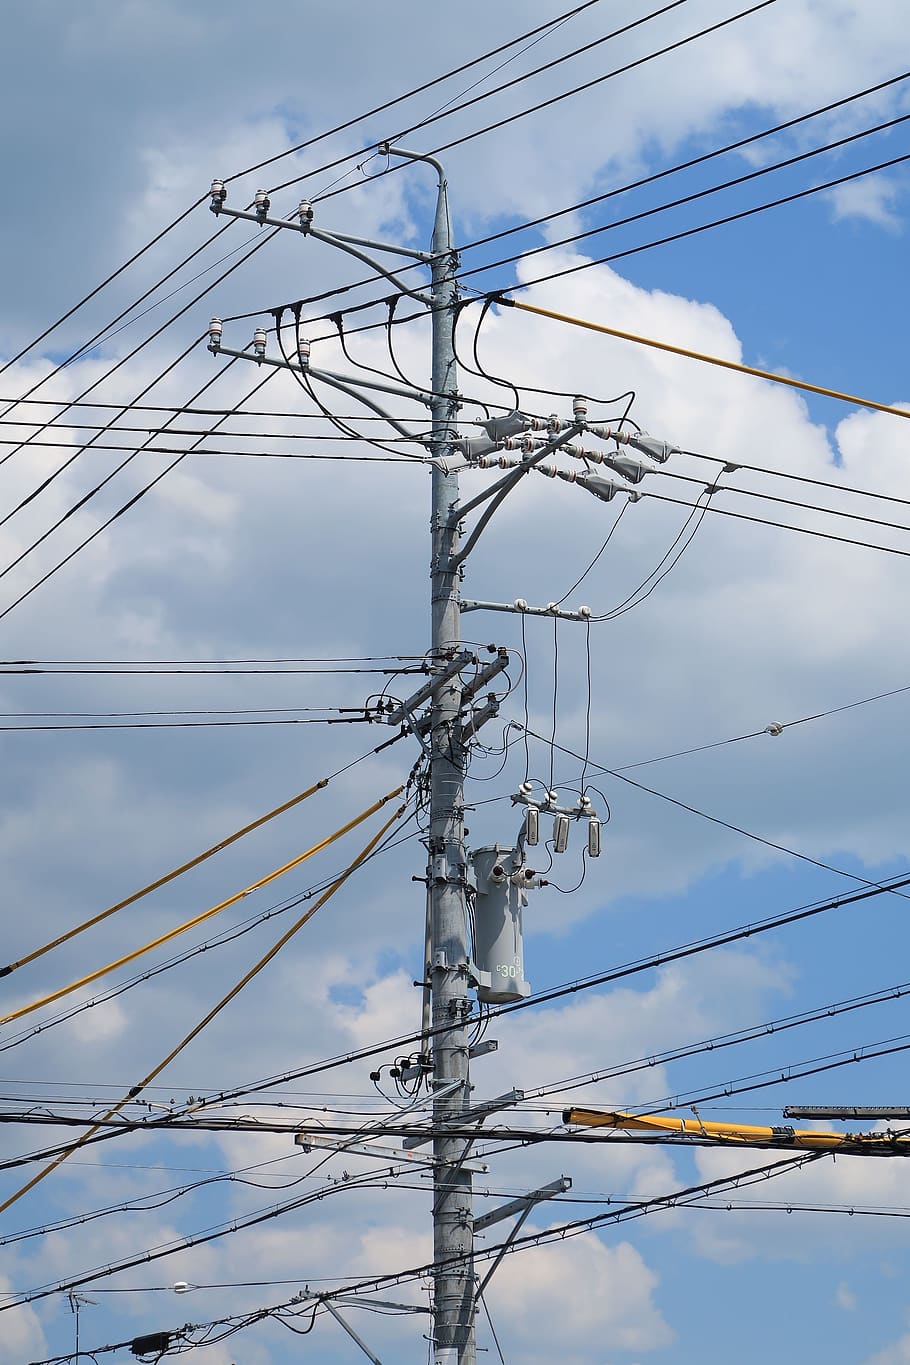 electrical, voltage, power, industrial, sky, energy, tall, send, utility pole, cable